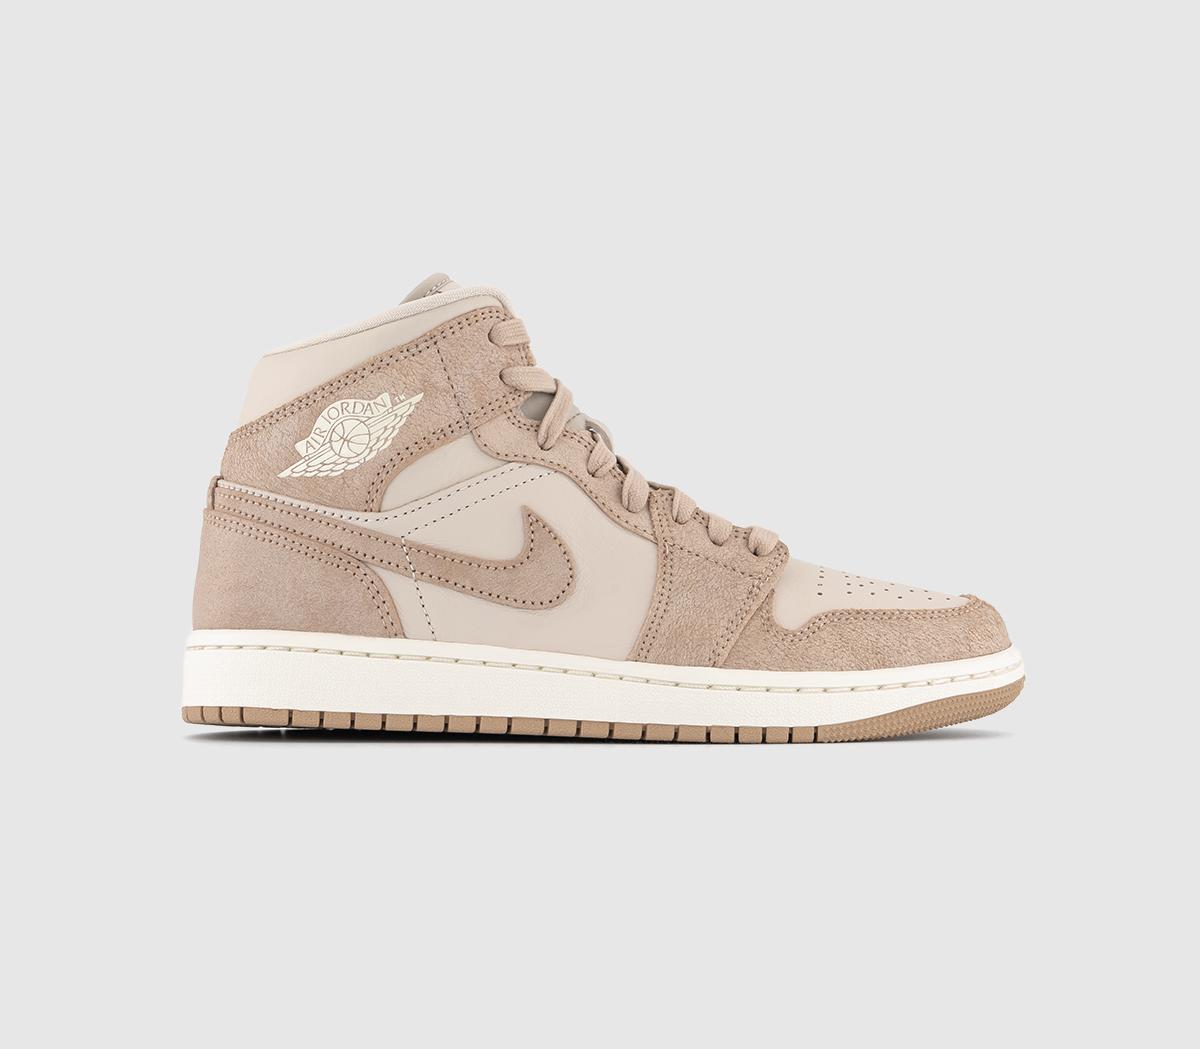 Air 1 Mid Trainers Legend Light Brown Sail